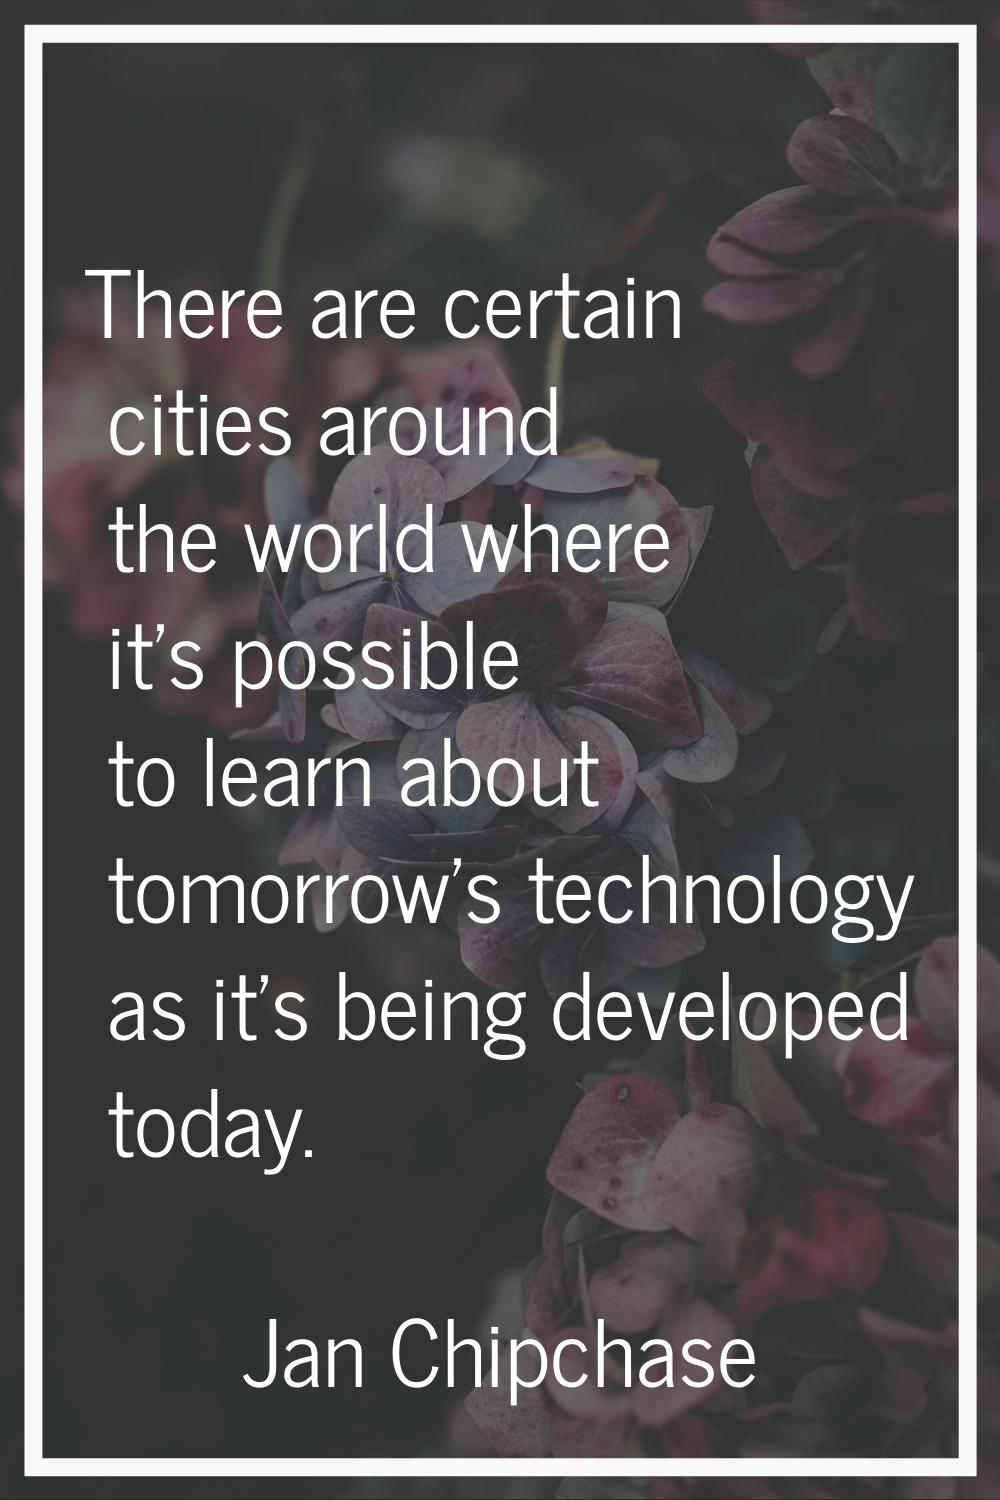 There are certain cities around the world where it's possible to learn about tomorrow's technology 